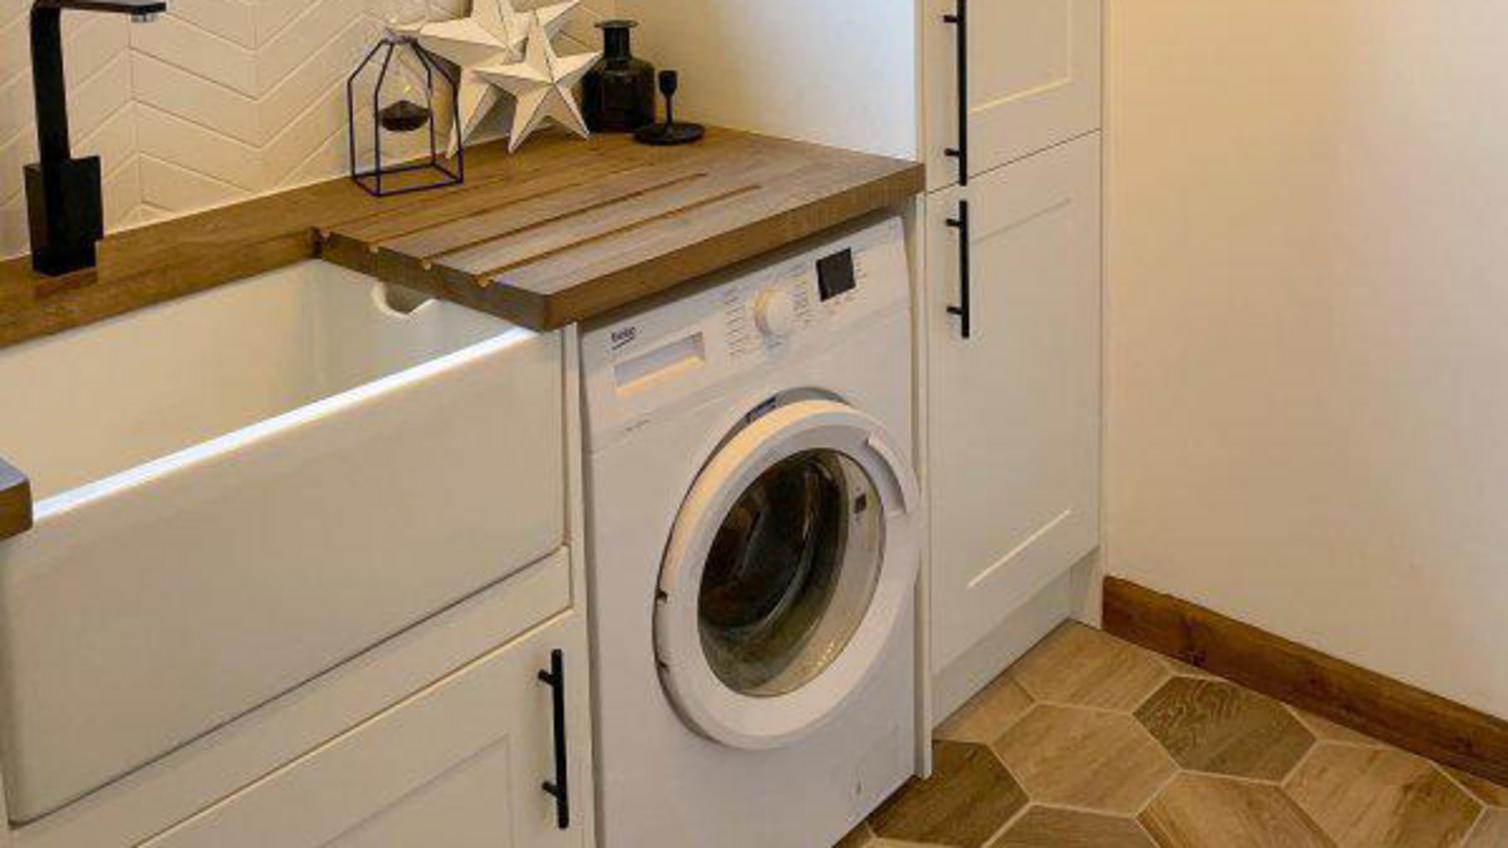 A small utility room in a white colour, with a deep belfast sink, washing machine, and natural timber worktop.